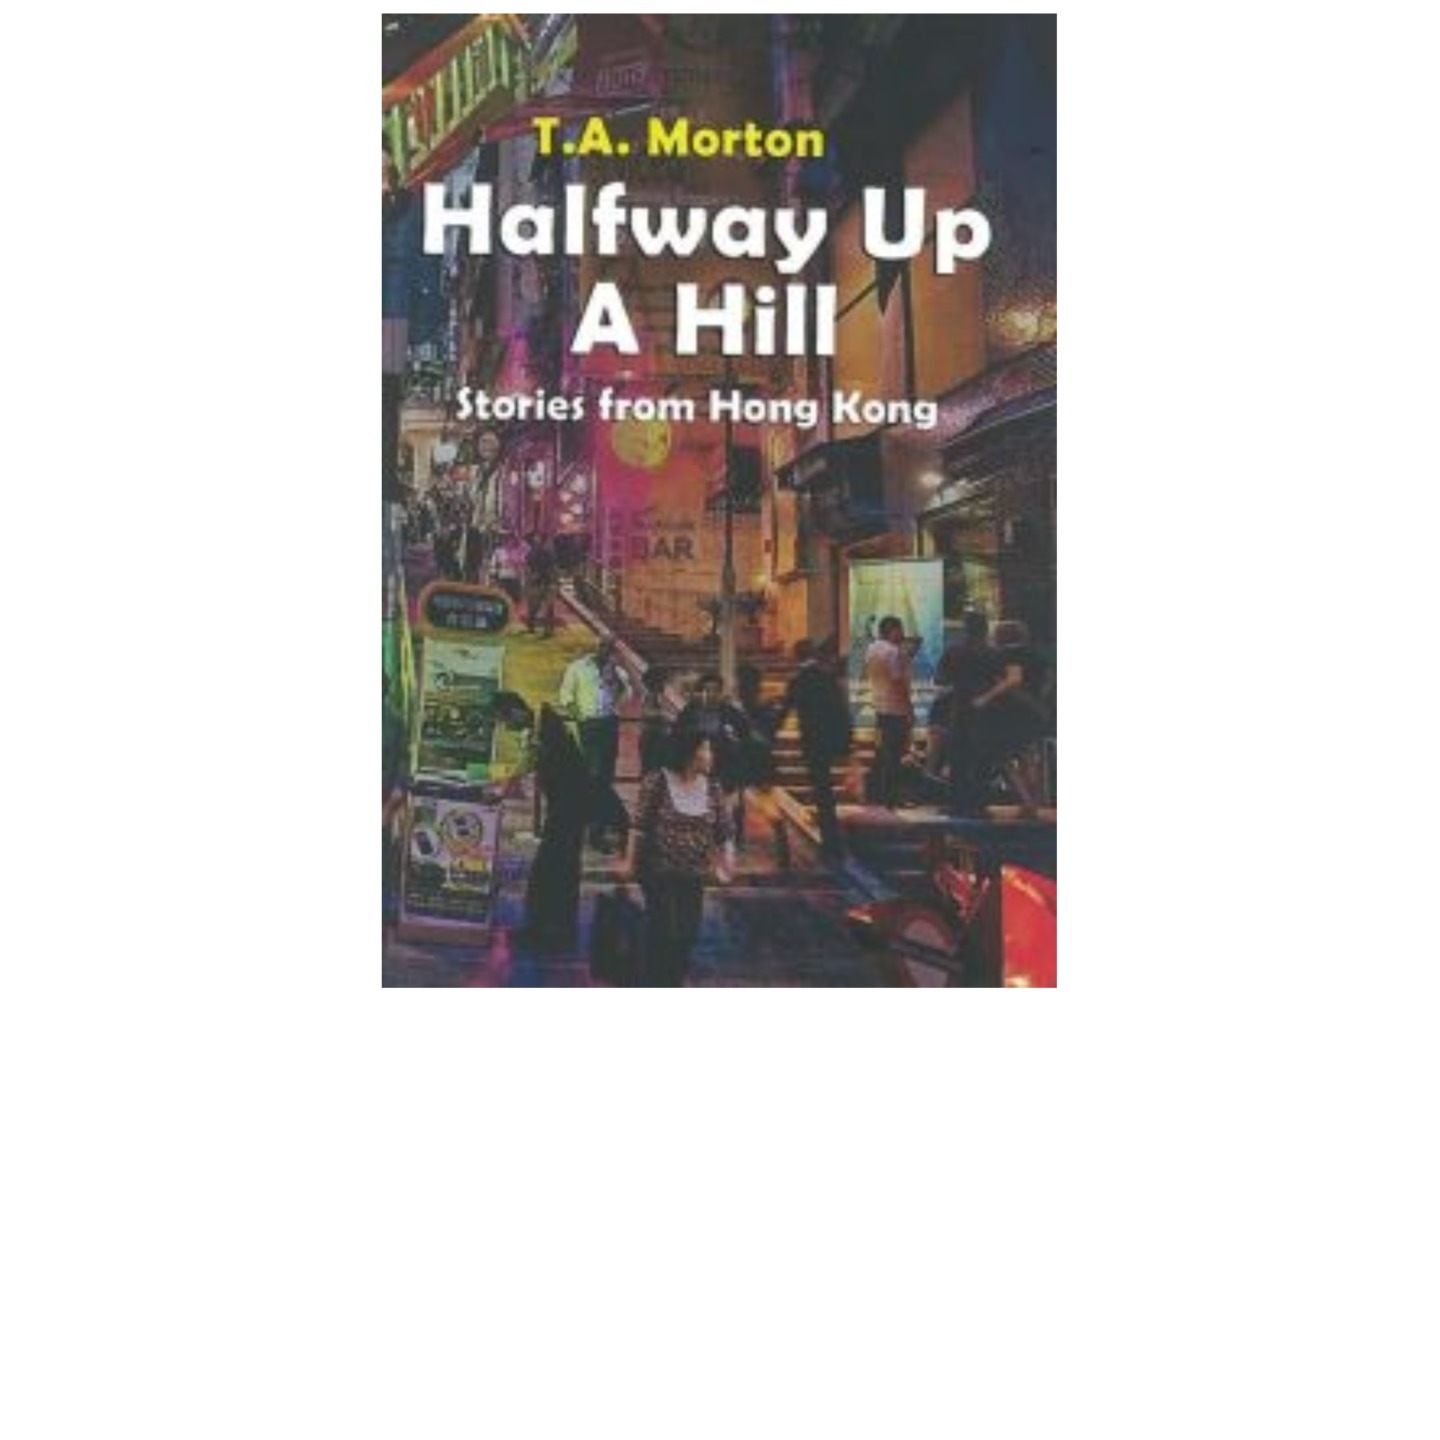 Halfway Up a Hill by T. A. Morton